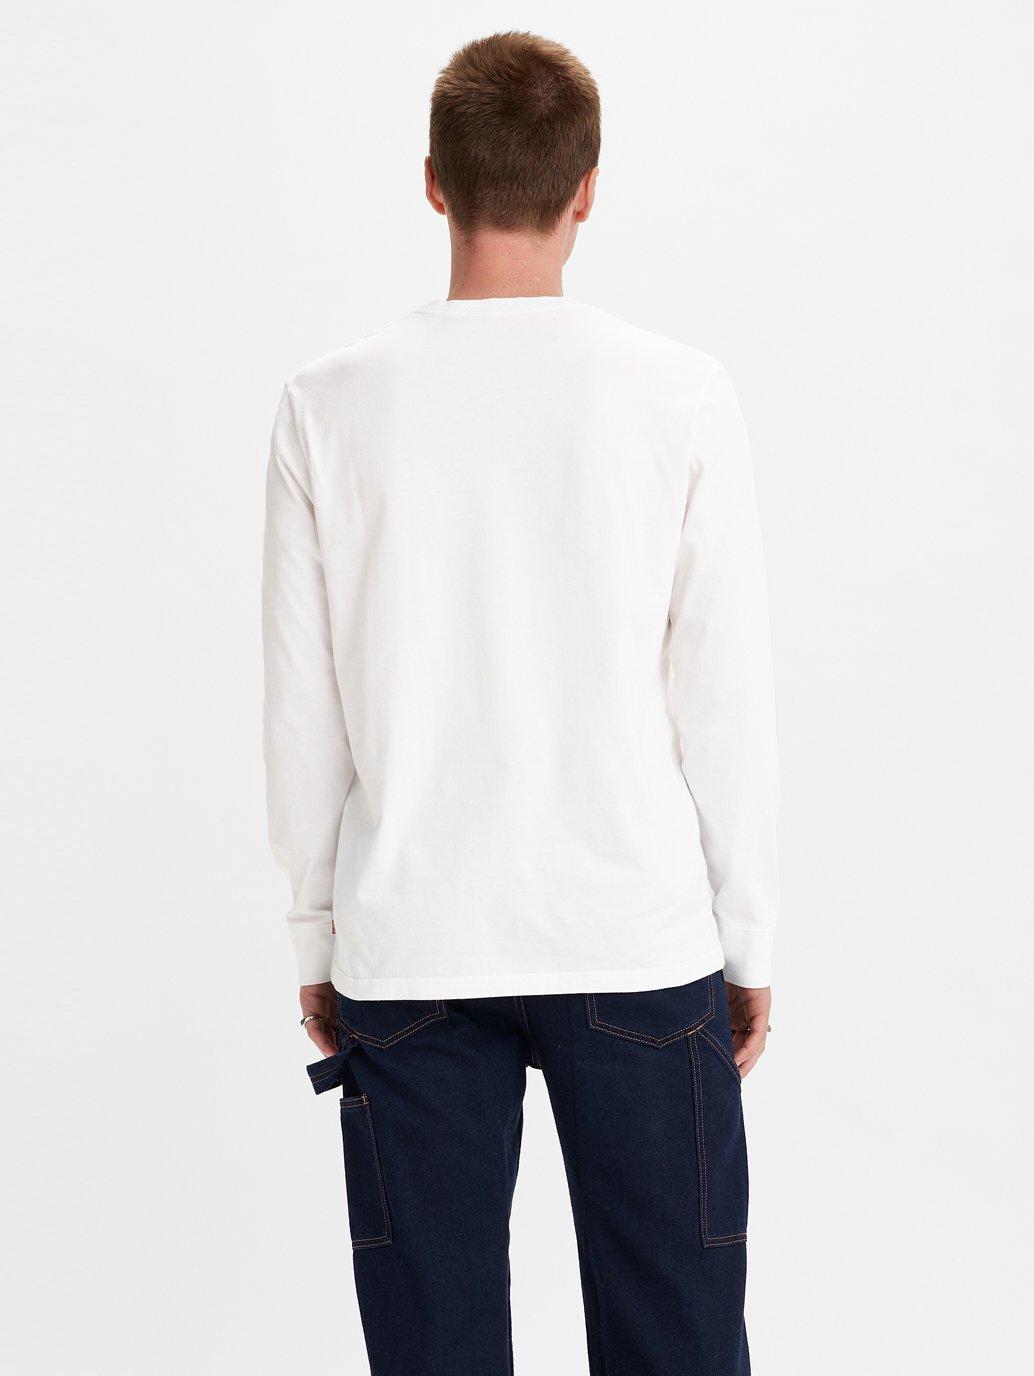 Buy Levi's® Men's Relaxed Fit Long Sleeve Graphic T-Shirt | Levi’s ...